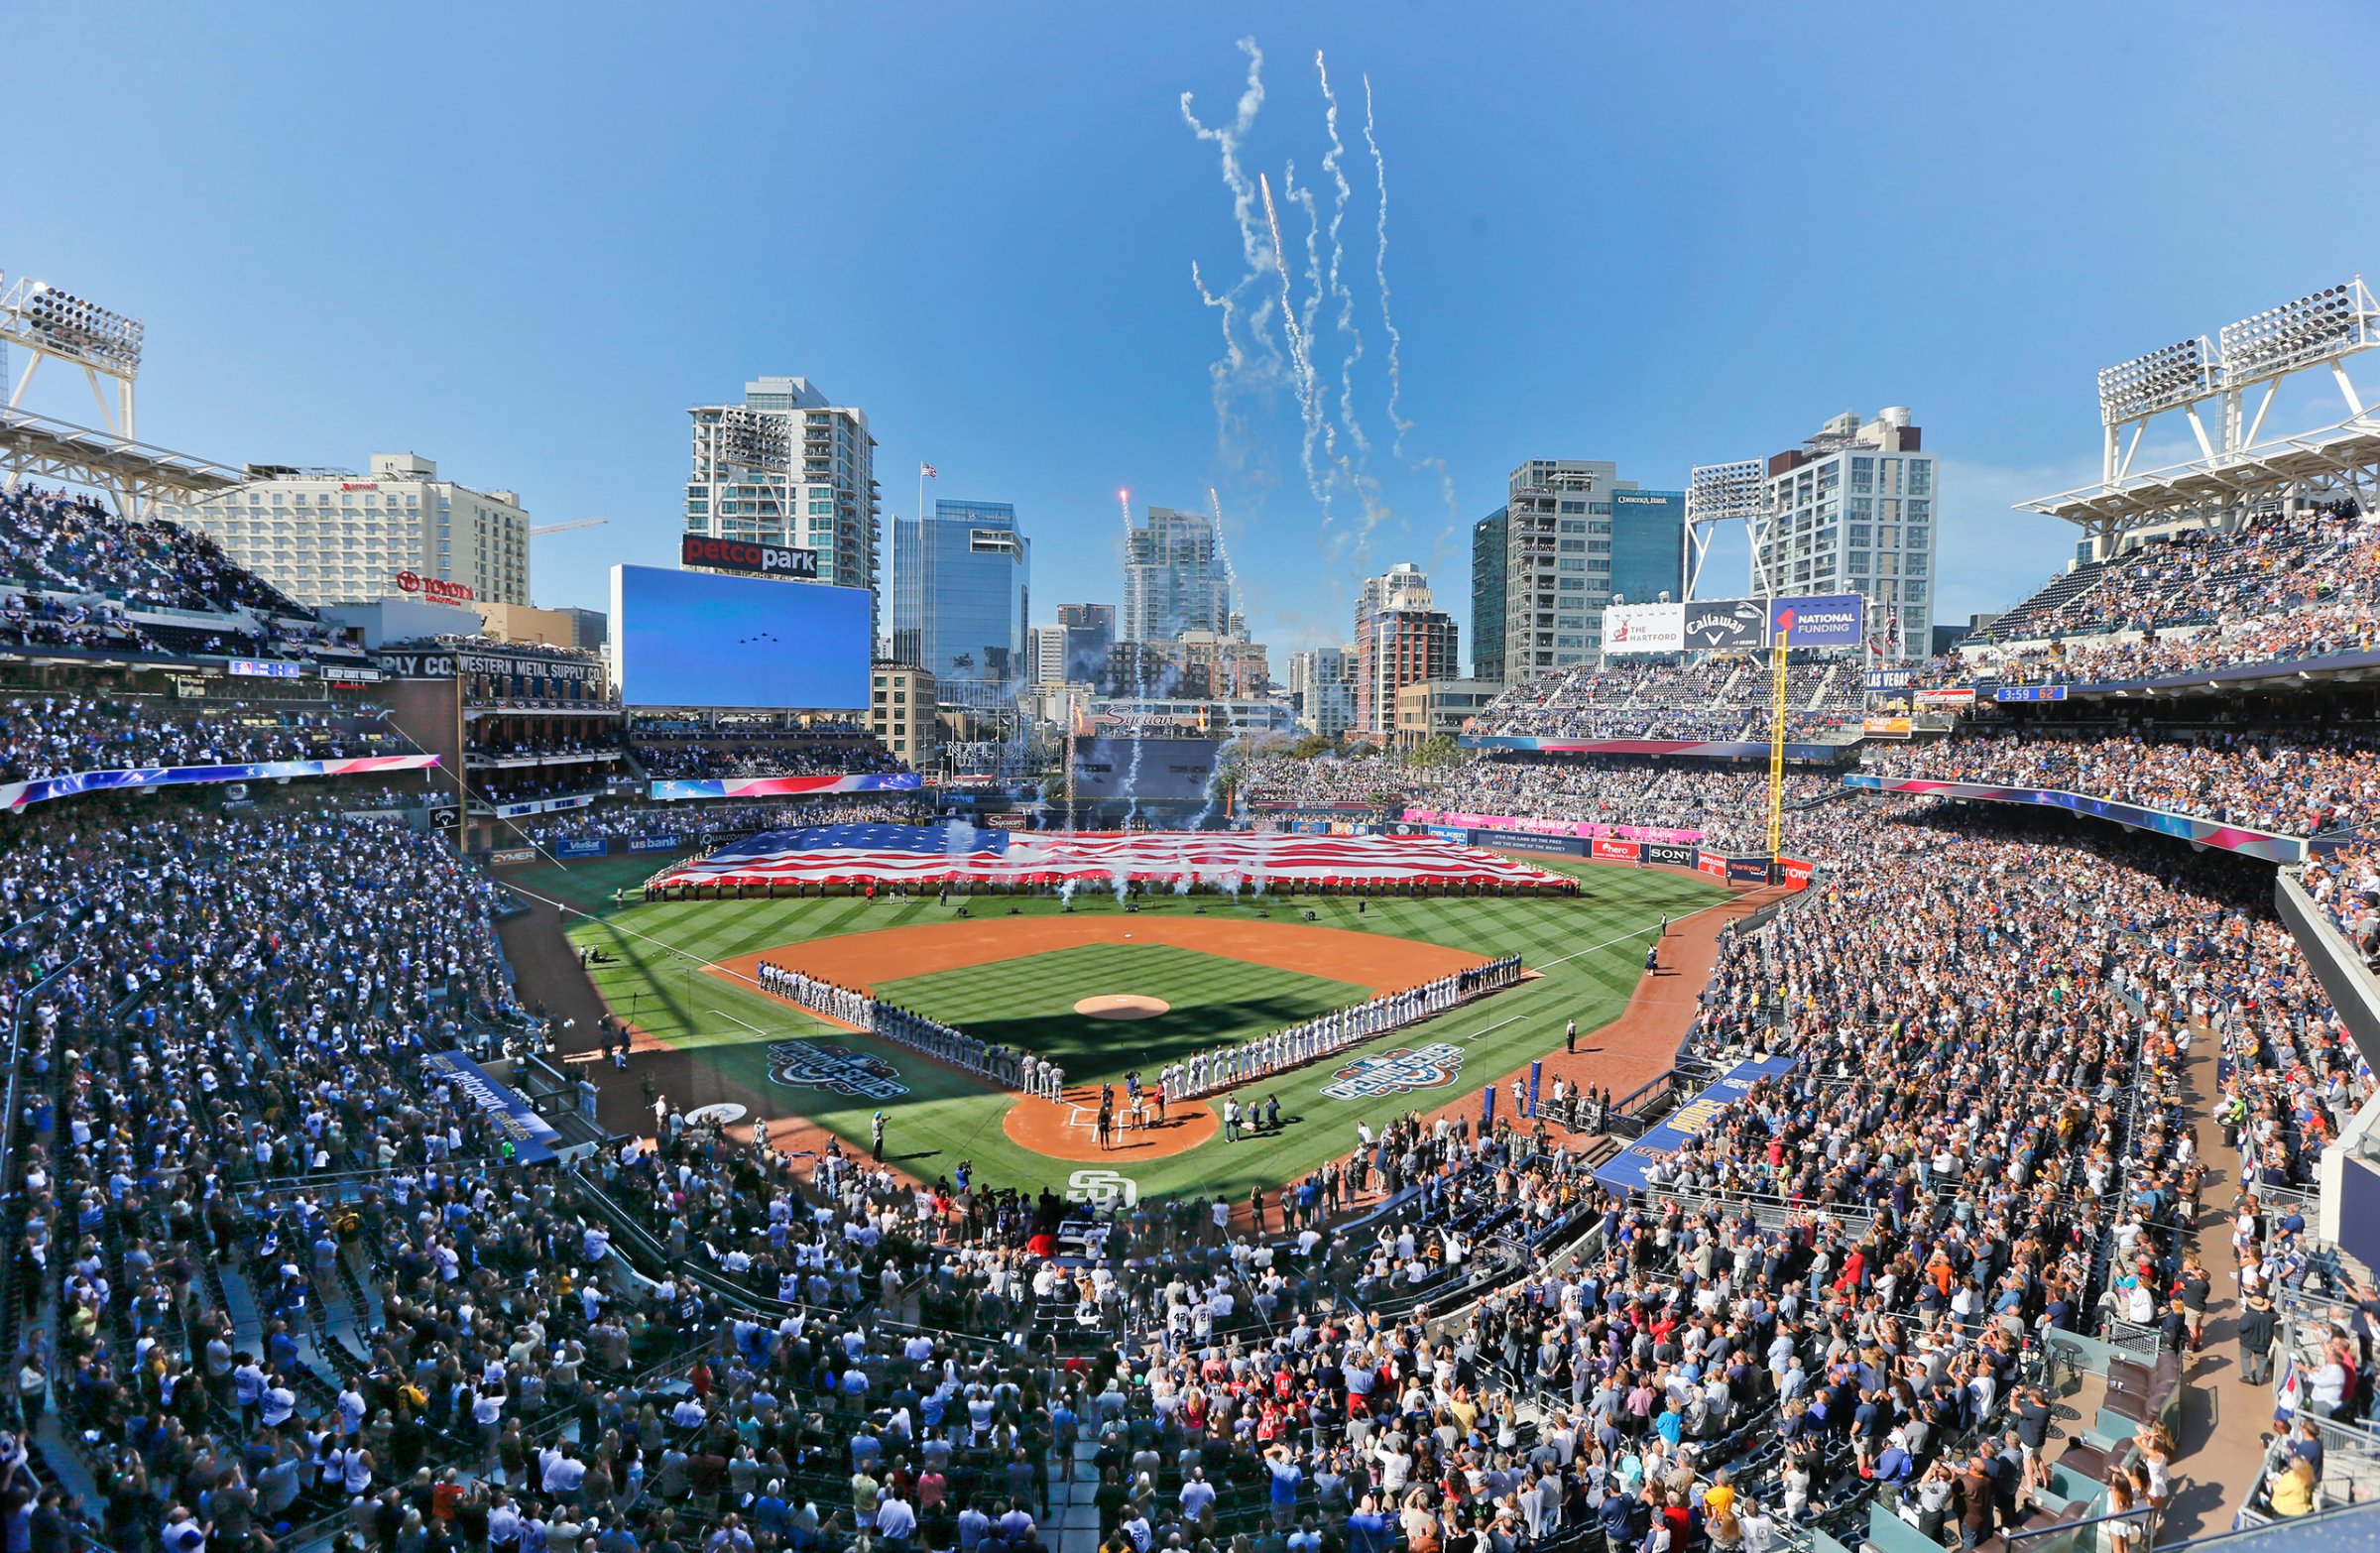 Opening day ceremonies are performed at Petco Park before a baseball game between the Los Angeles Dodgers and the San Diego Padres in San Diego, April 4, 2016.